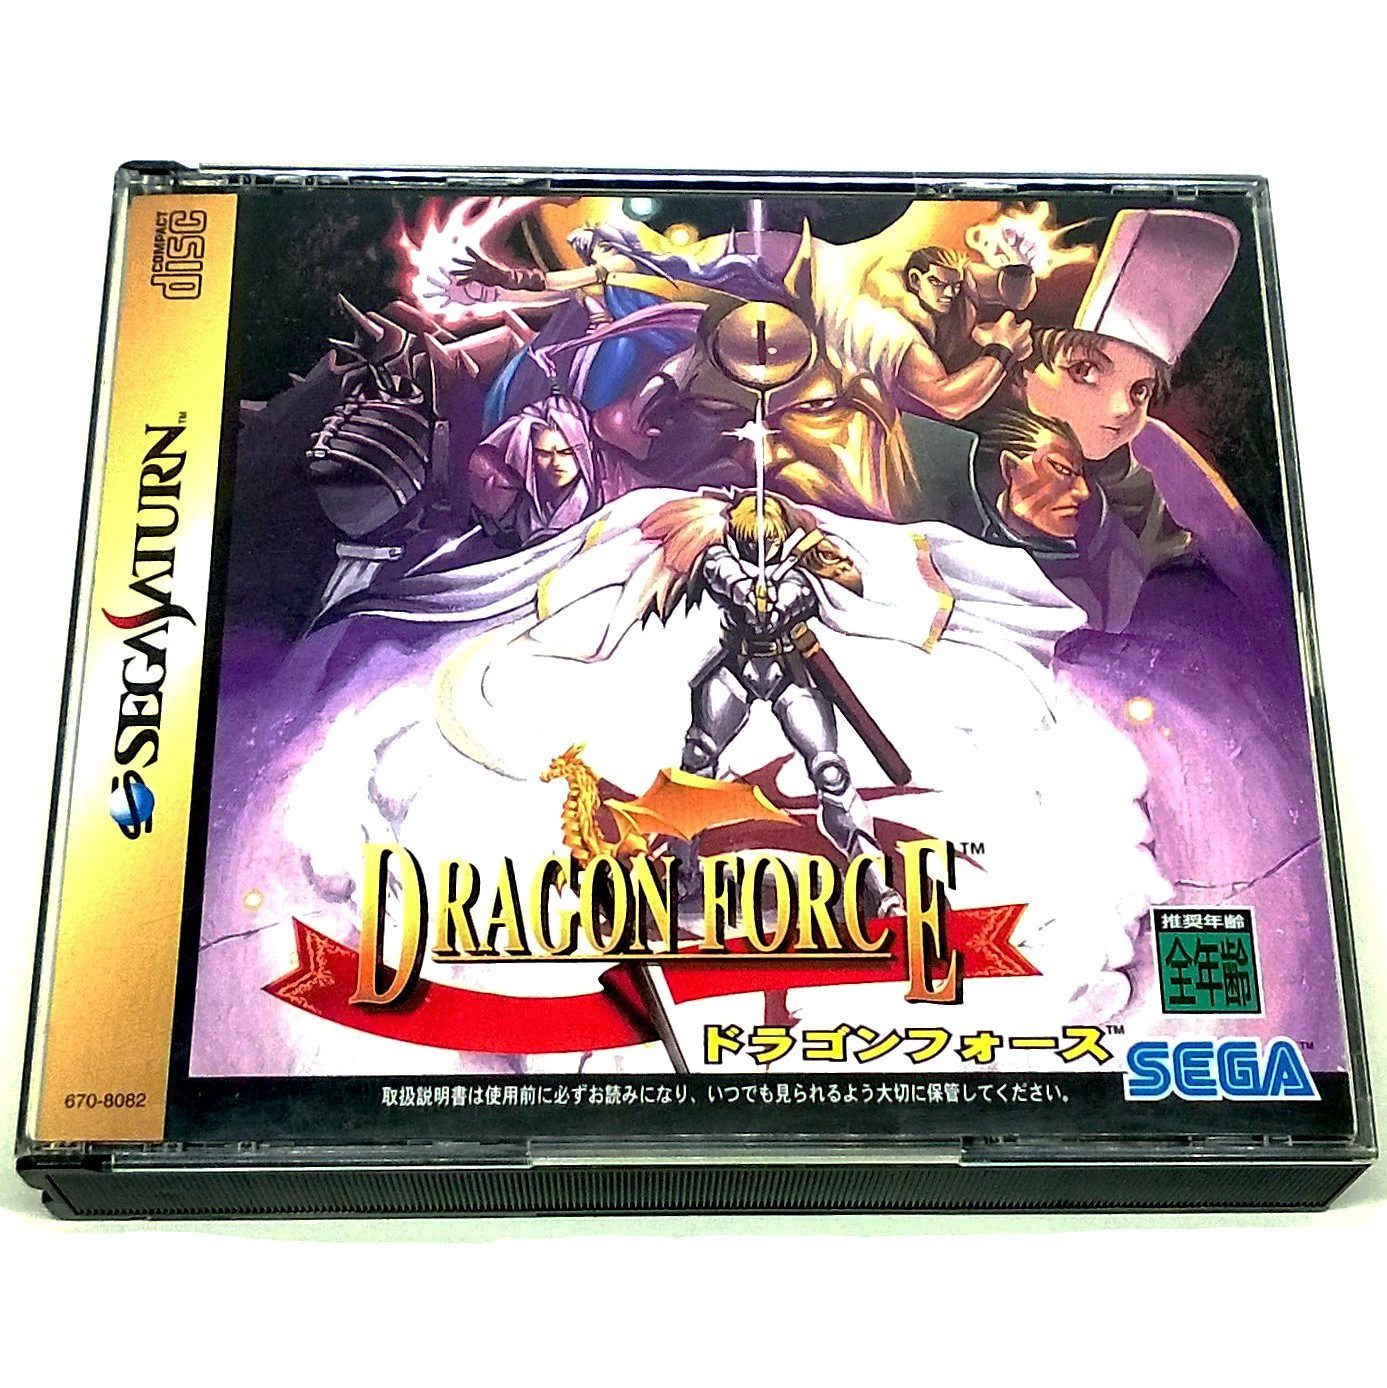 Dragon Force for Saturn (import) - Front of case